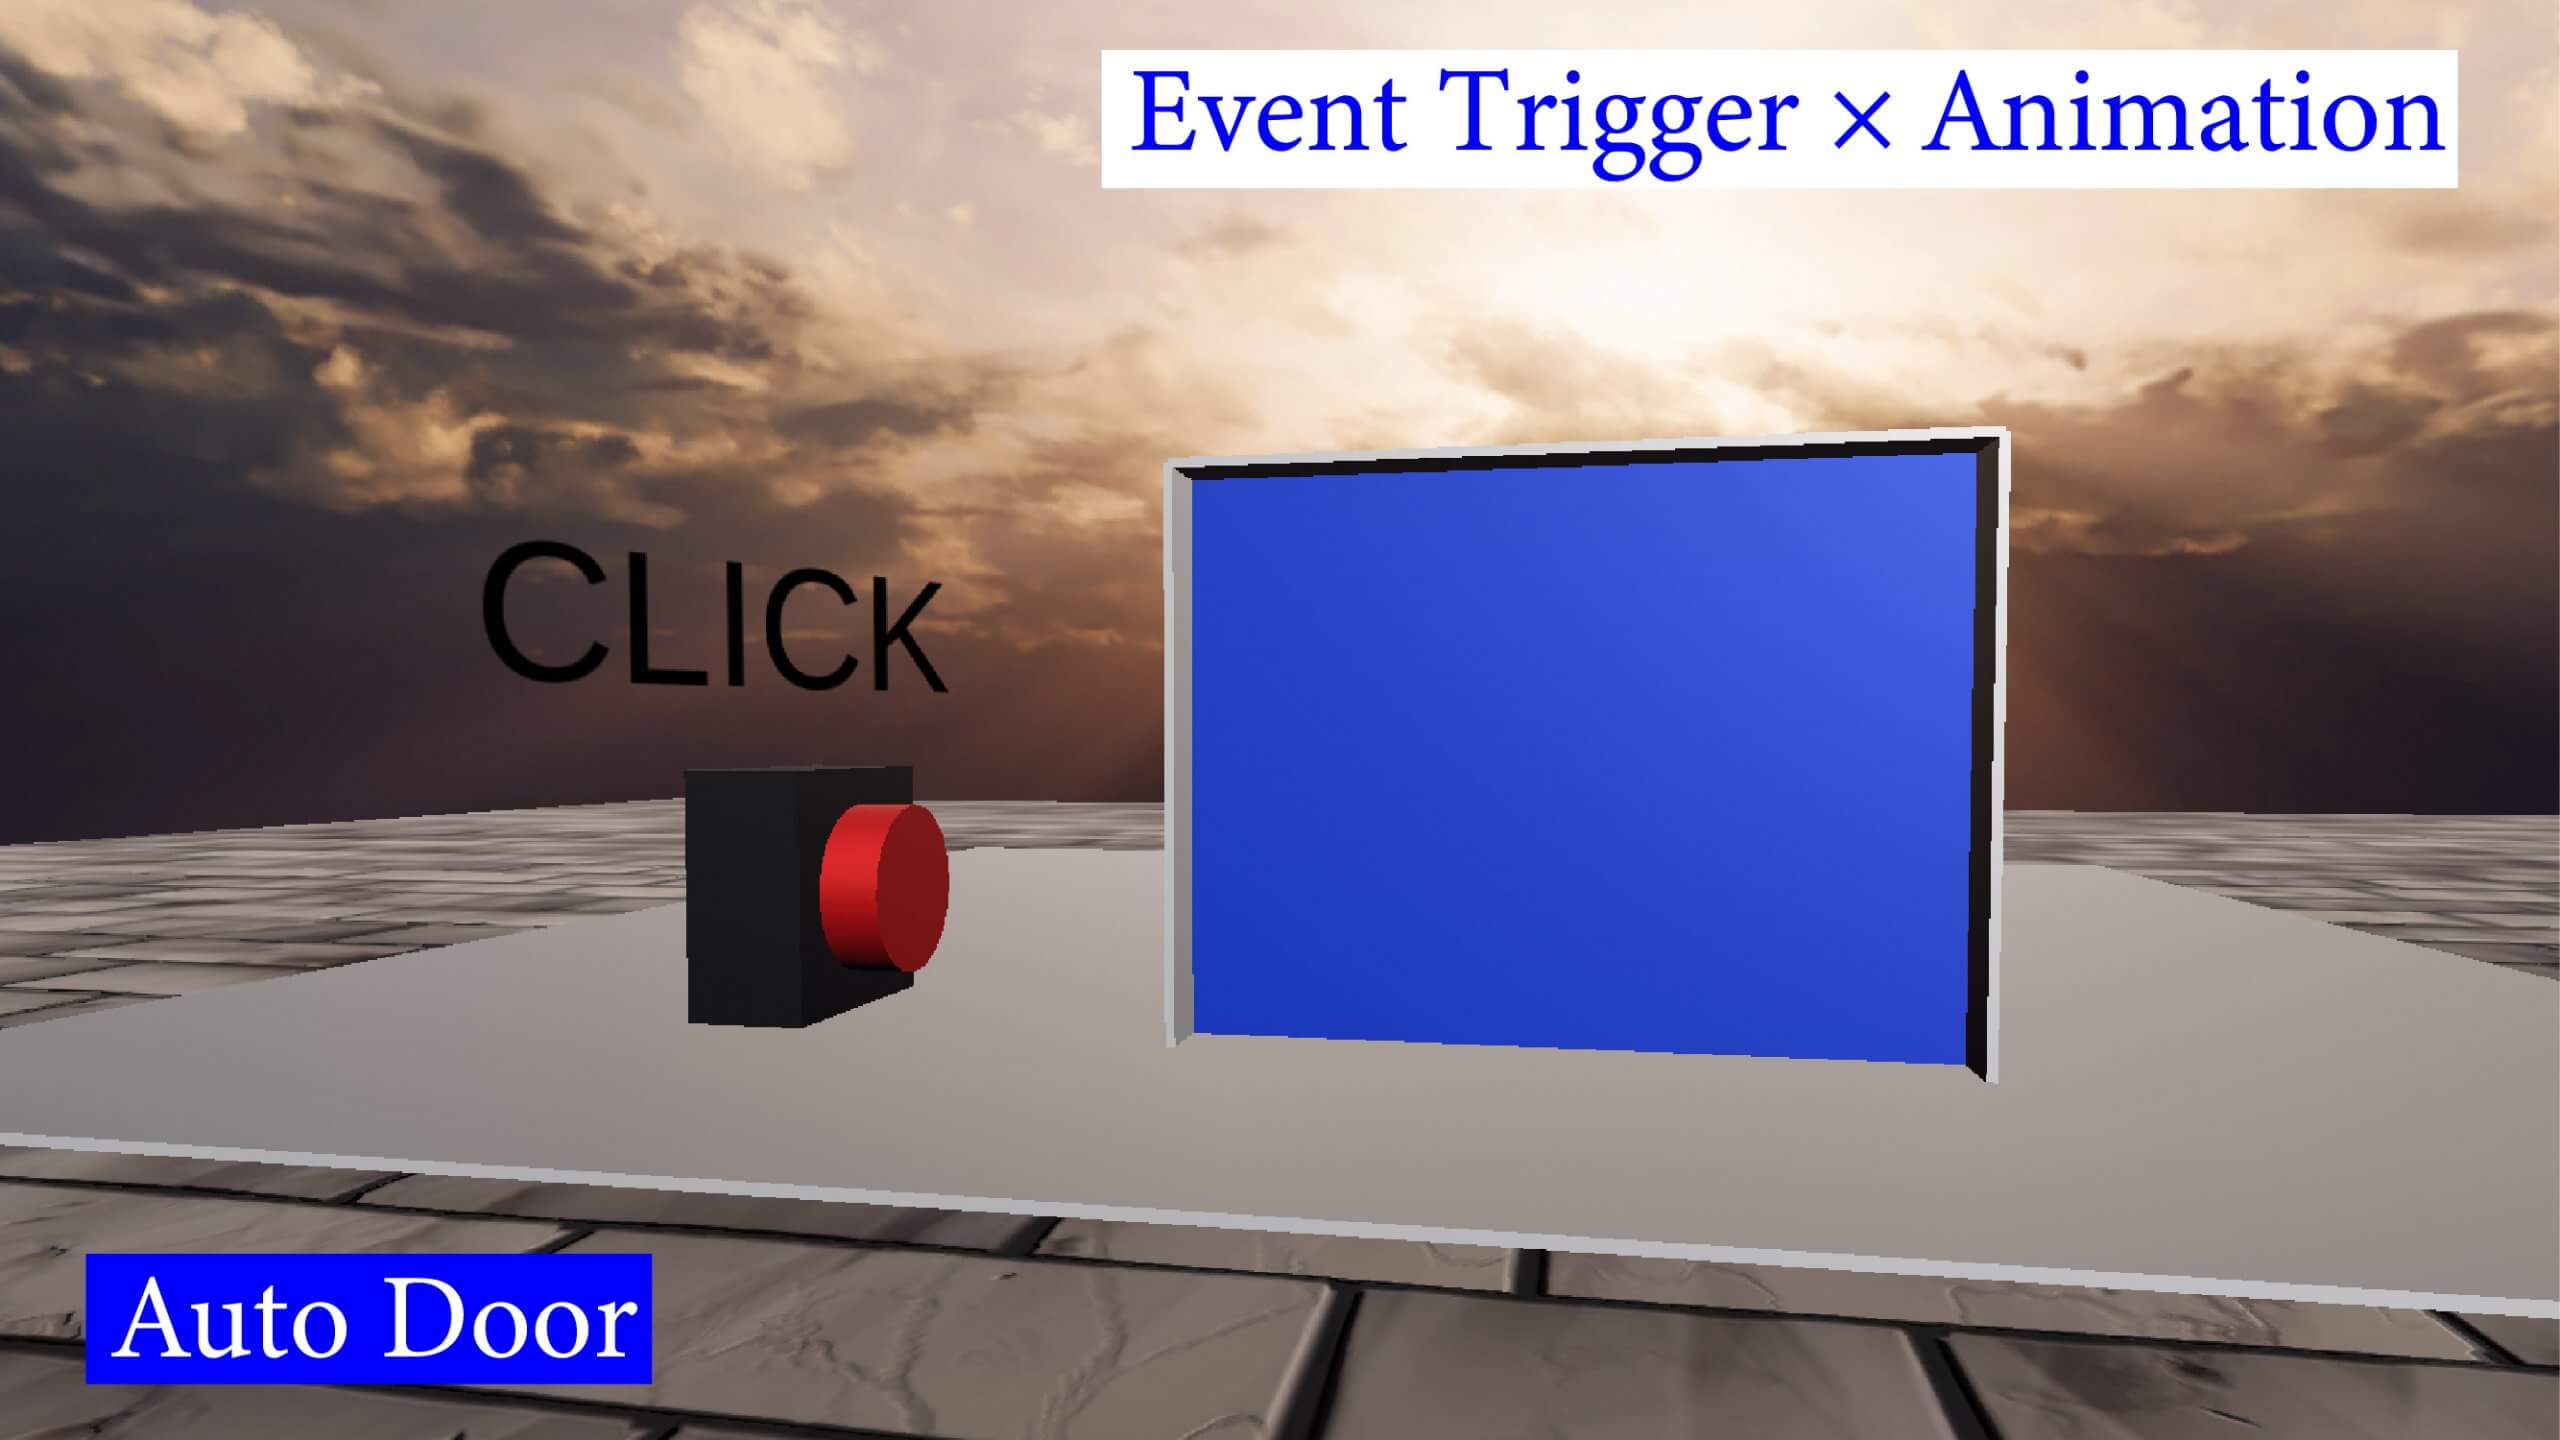 Unity] Create an automatic door using Event Trigger and animation | STYLY